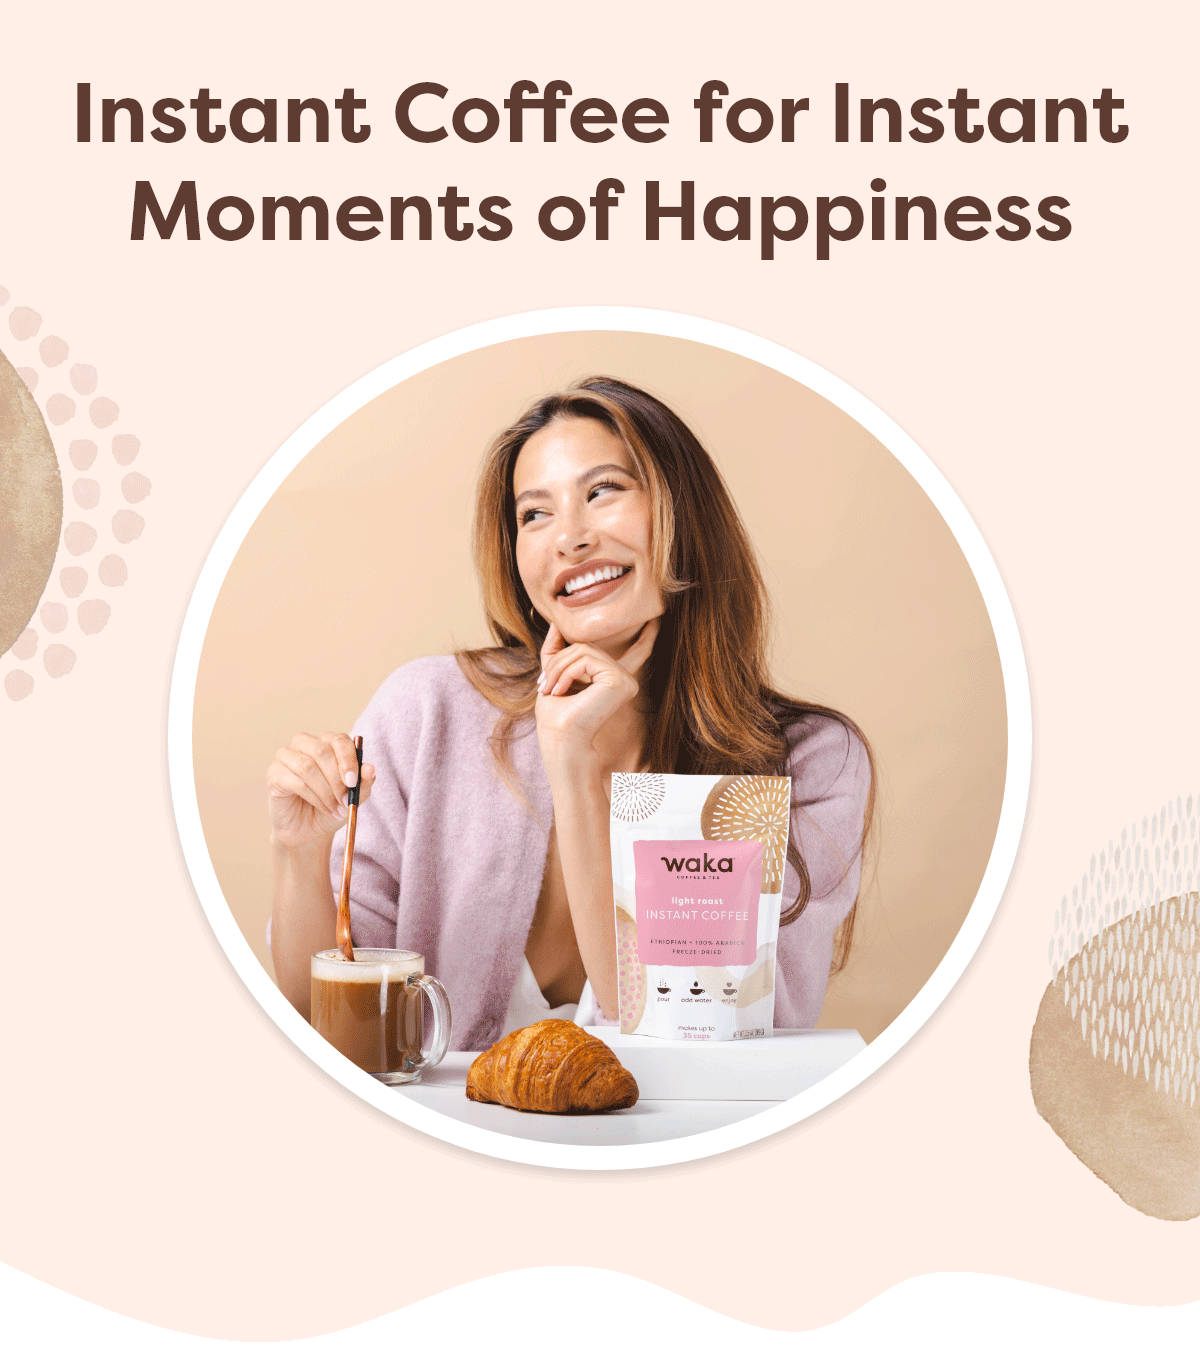 Instant Coffee for Instant Moments of Happiness